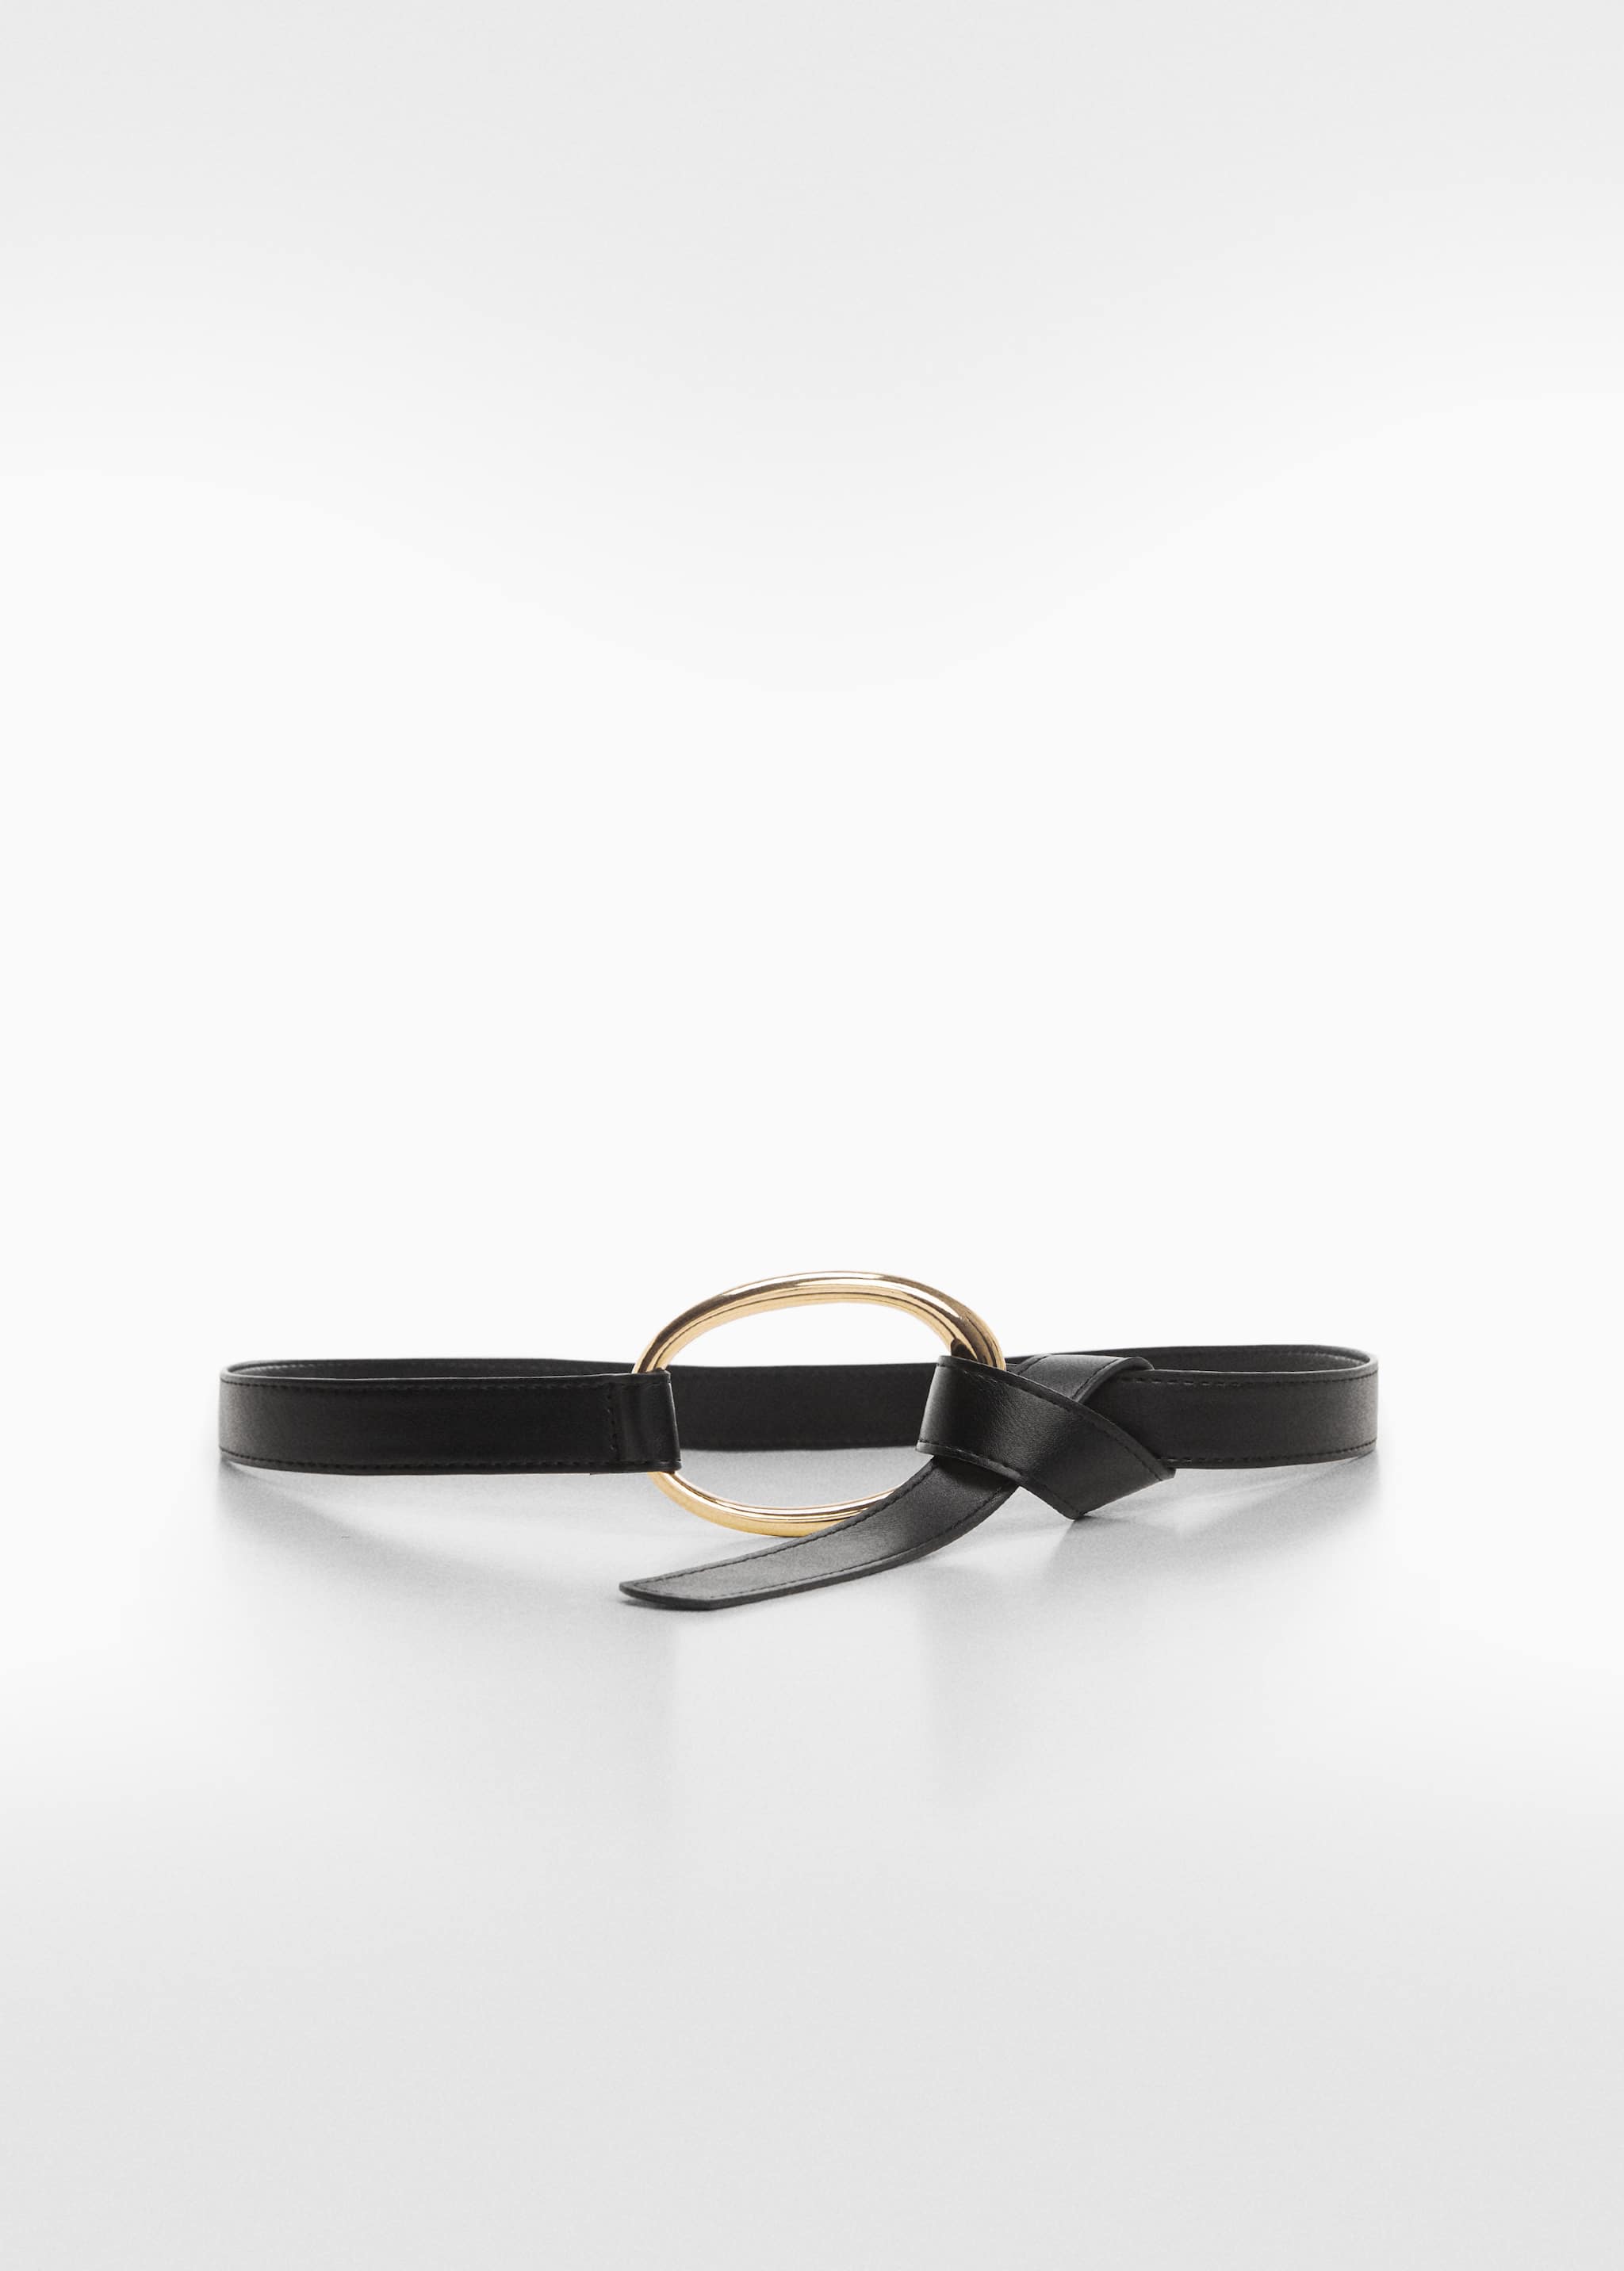 Oval buckle belt - Article without model